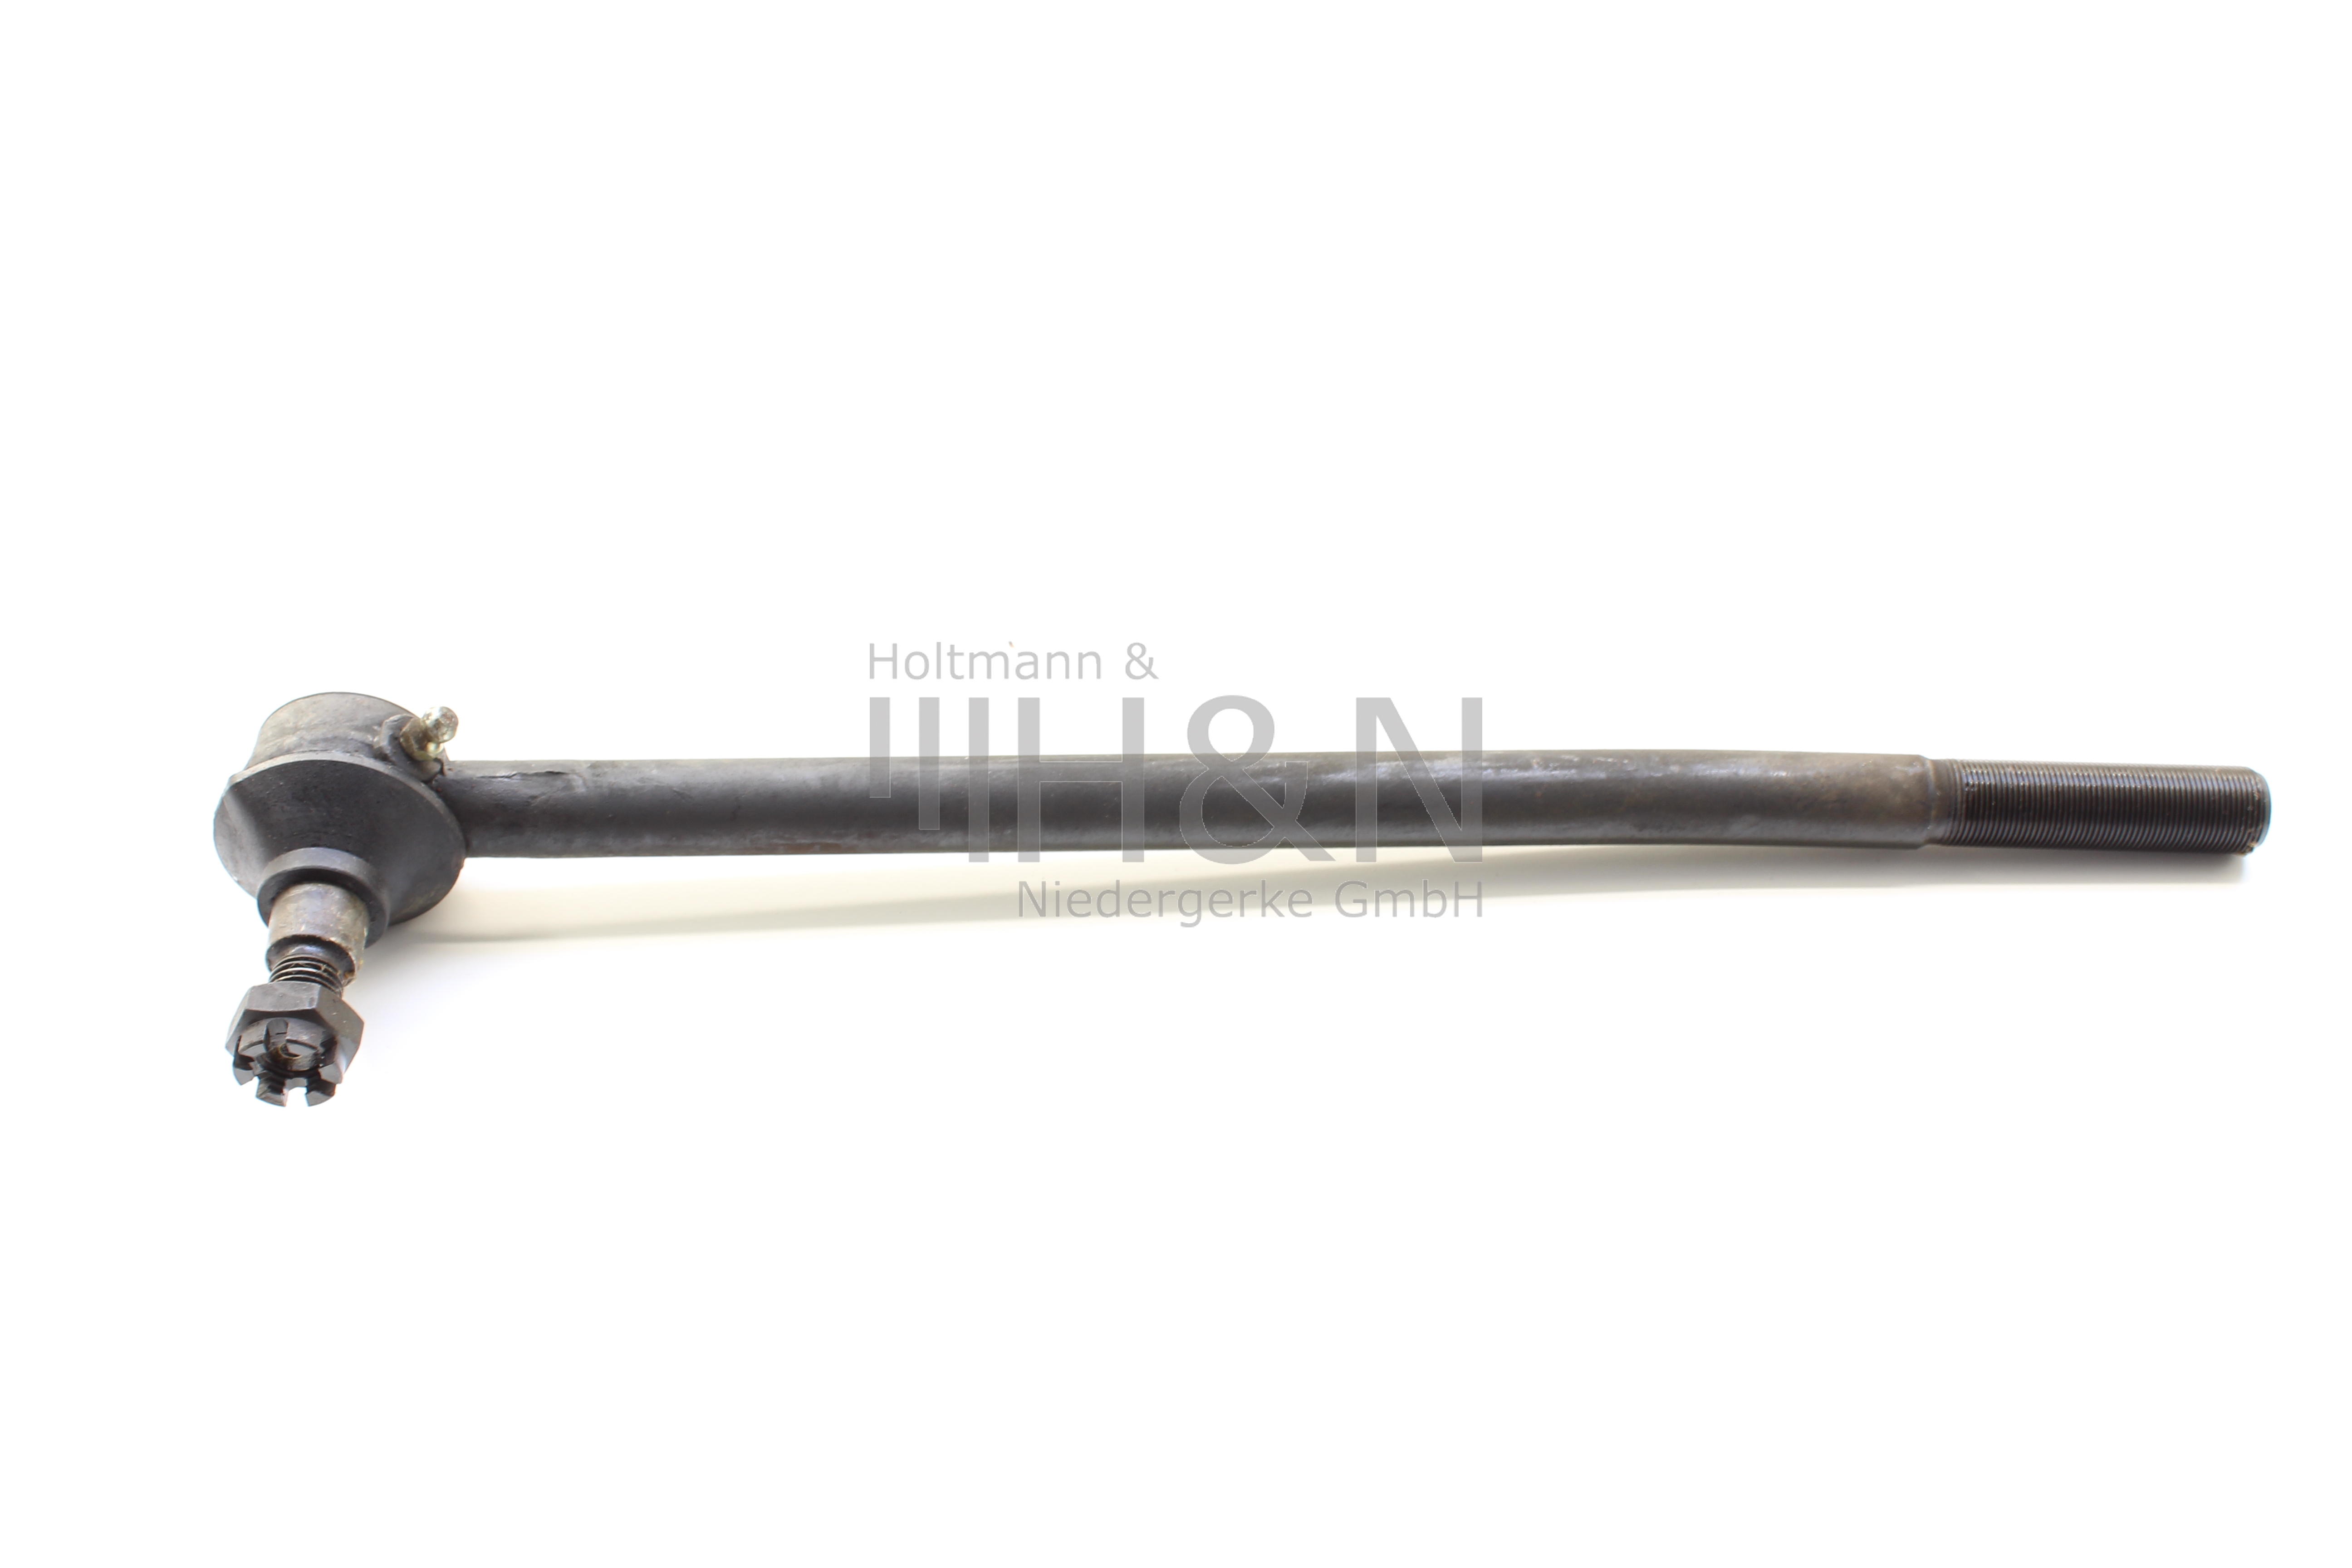 New Tie Rod Assembly/ Steering Control Arm Details about   Fiat 1100 D,1100 R 